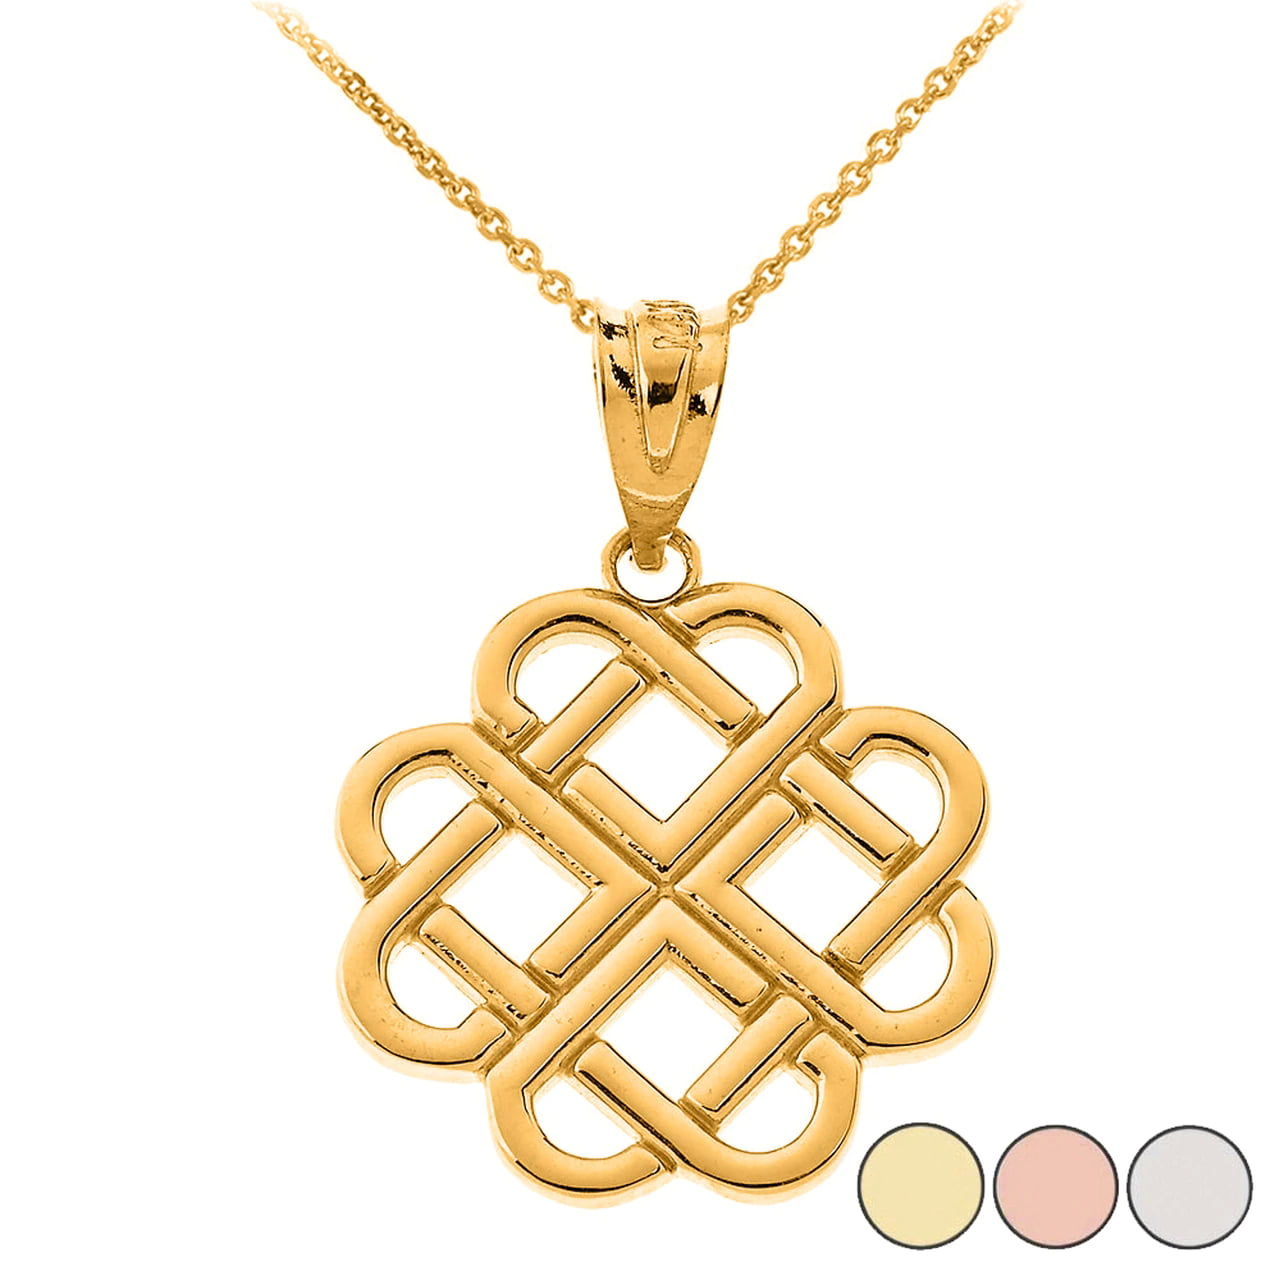 INTERLOCKING HEARTS CELTIC LOVE KNOT PENDANT NECKLACE IN SOLID GOLD YELLOW ROSE WHITE 10K Pendant with 20 chain 43a0a4a9 5bce 4d8e aa87 65a8c64248a9.516b06848b9da4716af97a7873043f57